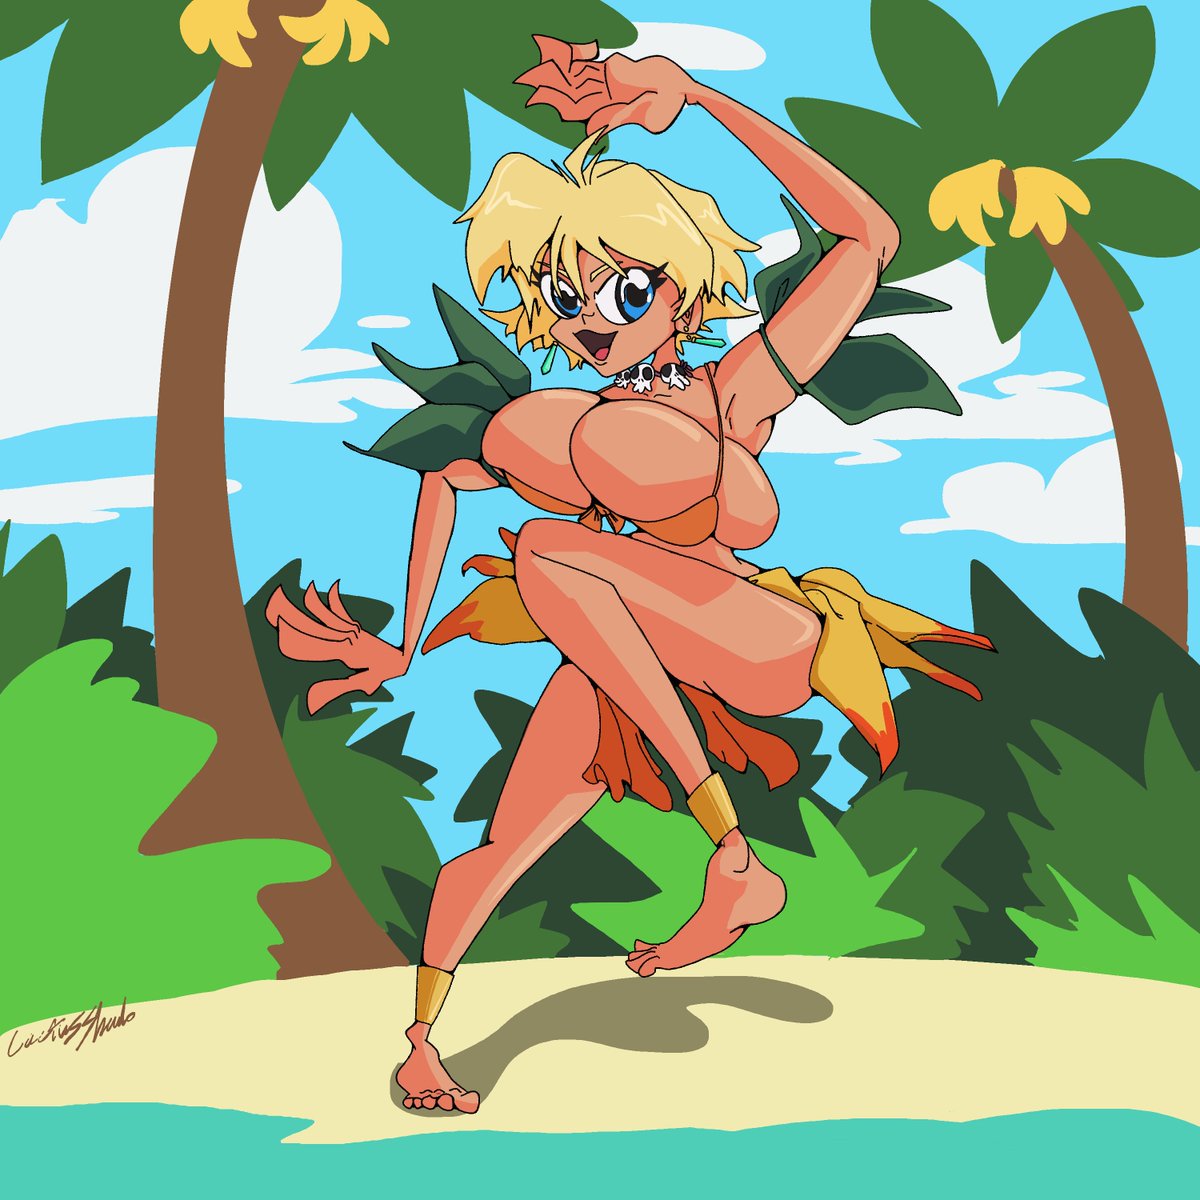 Jungle Jungle! 🍈🍈 Gotta' respect the OGs, was sitting on a half-finished version of this for months. Not sure if mashing early 00s anime and my style together works but its done! Got a potential bigger sequel in the works though 🌵